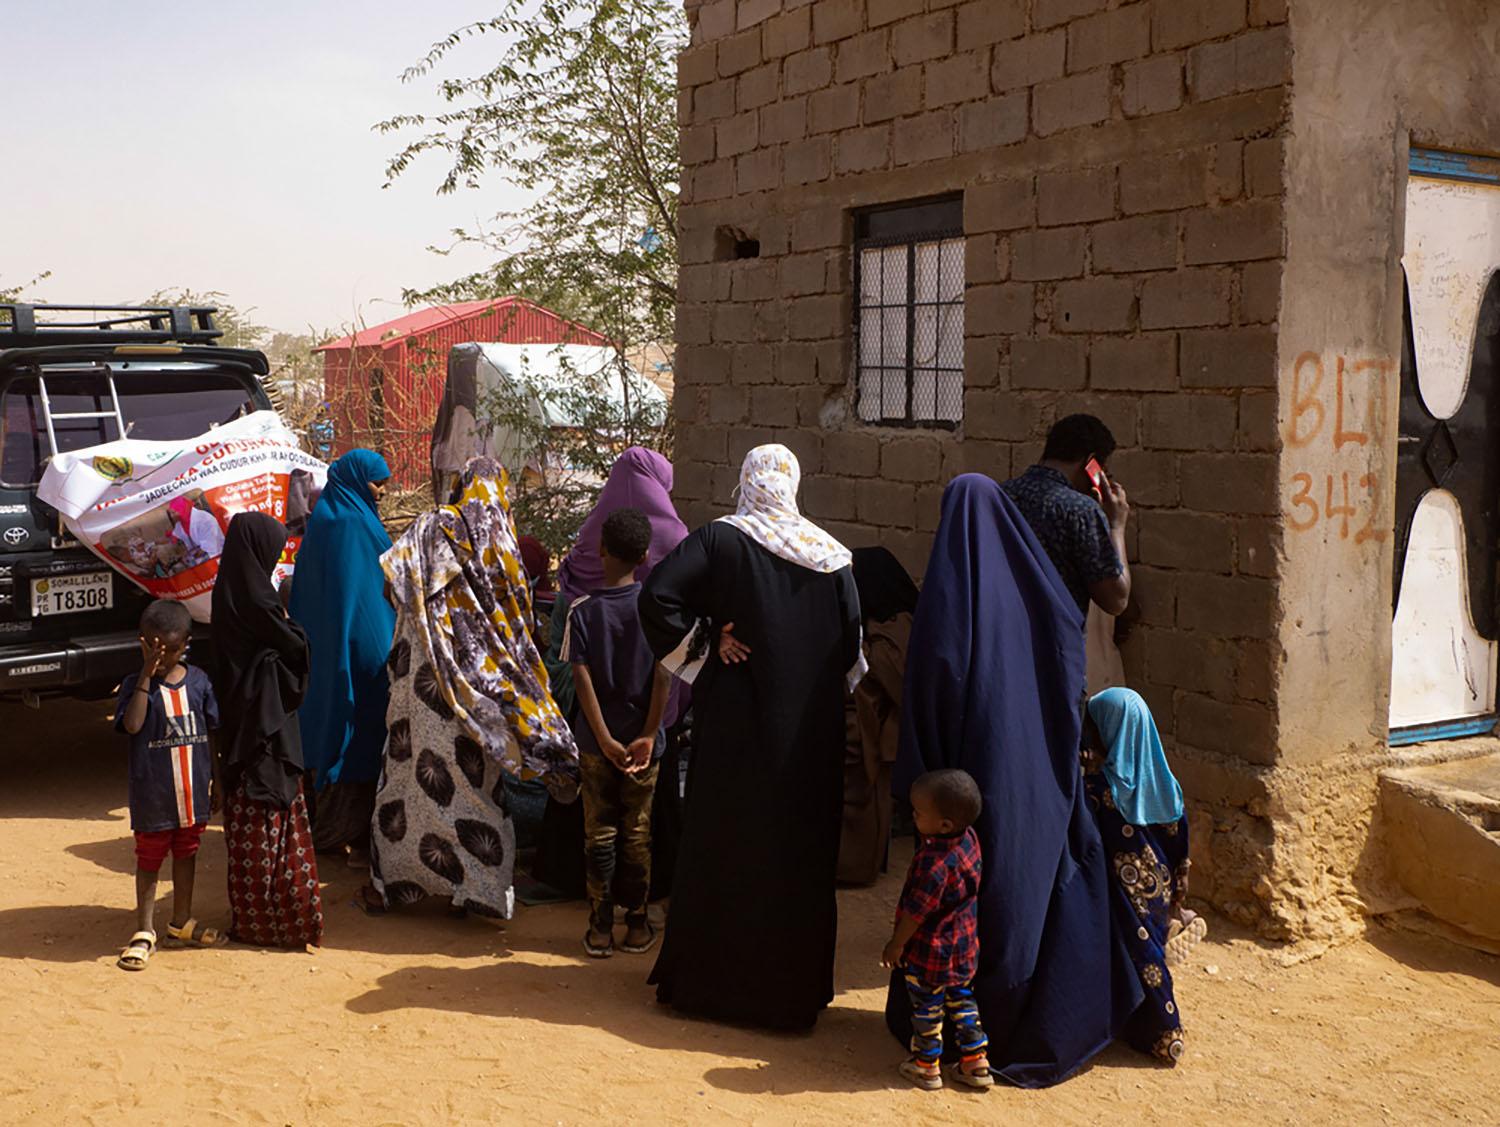 A group of mothers who brought their children for measles vaccination in Aqil Yare IDP camp, Burao, Somaliland.